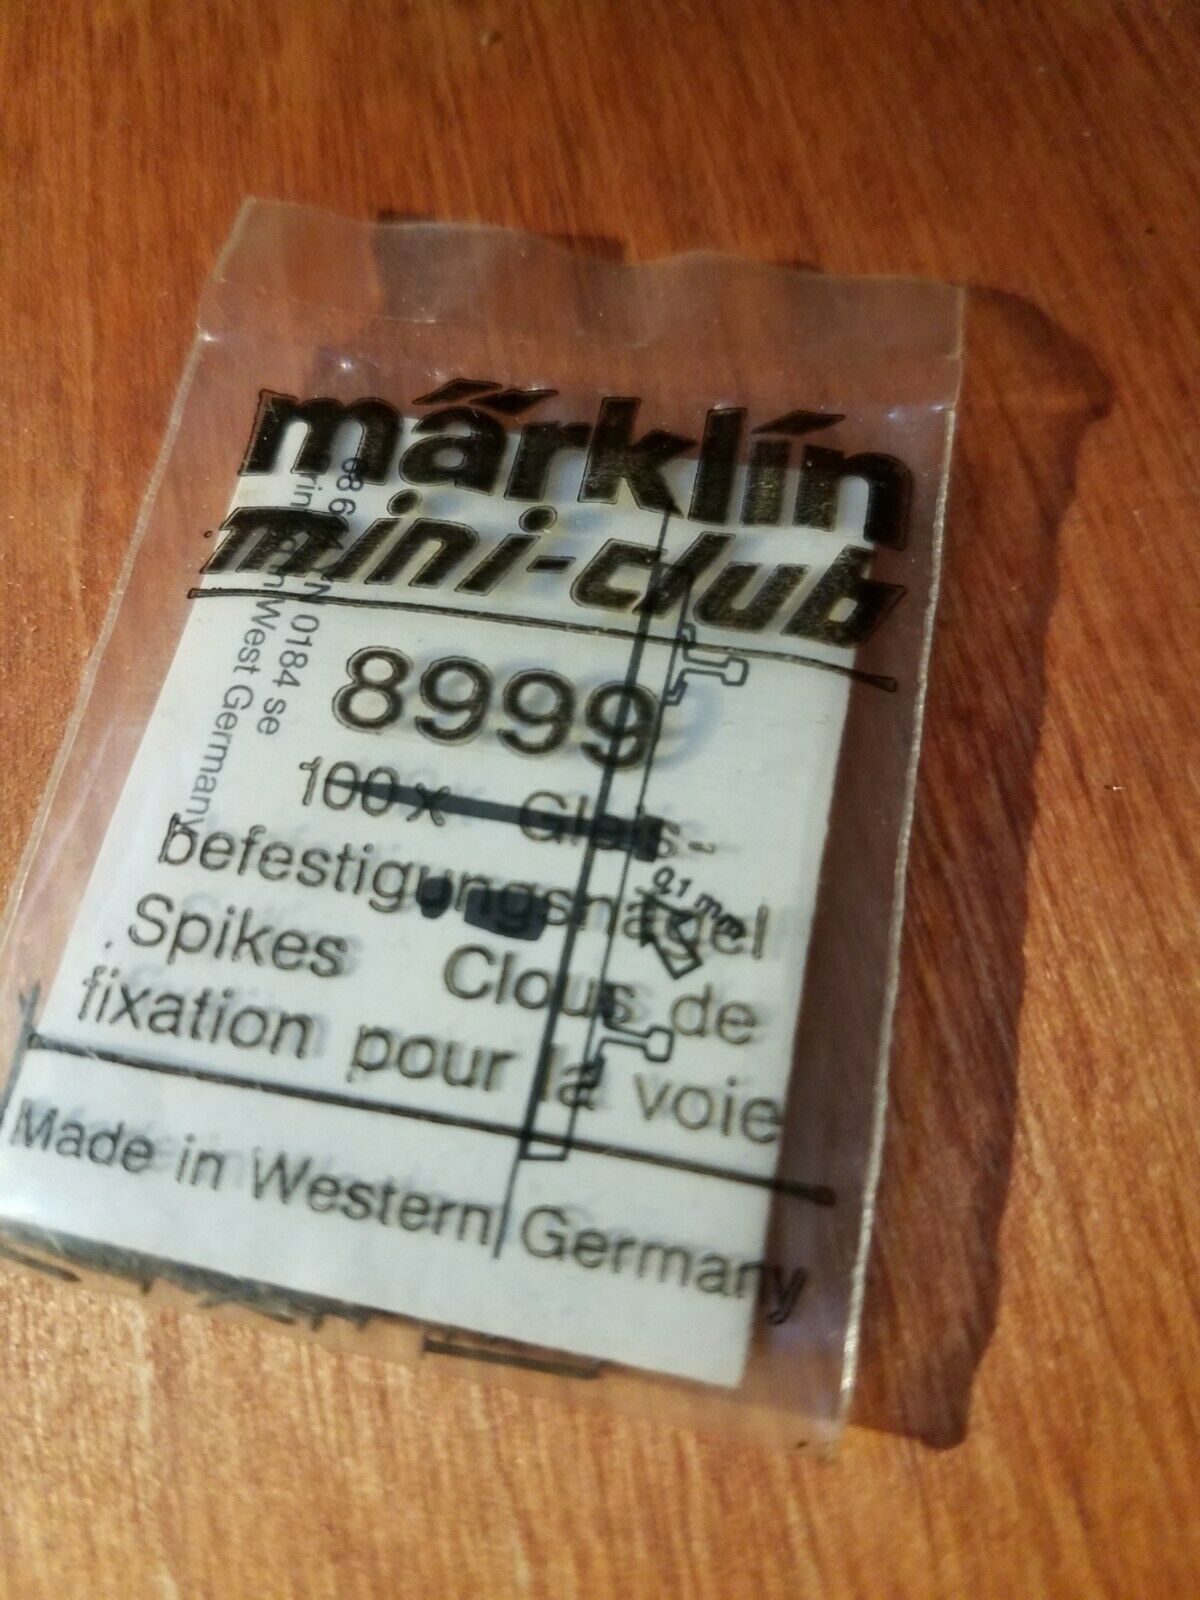 1 Bag Marklin Z 8999 Railroad Spikes 100 Spikes In The Bag.